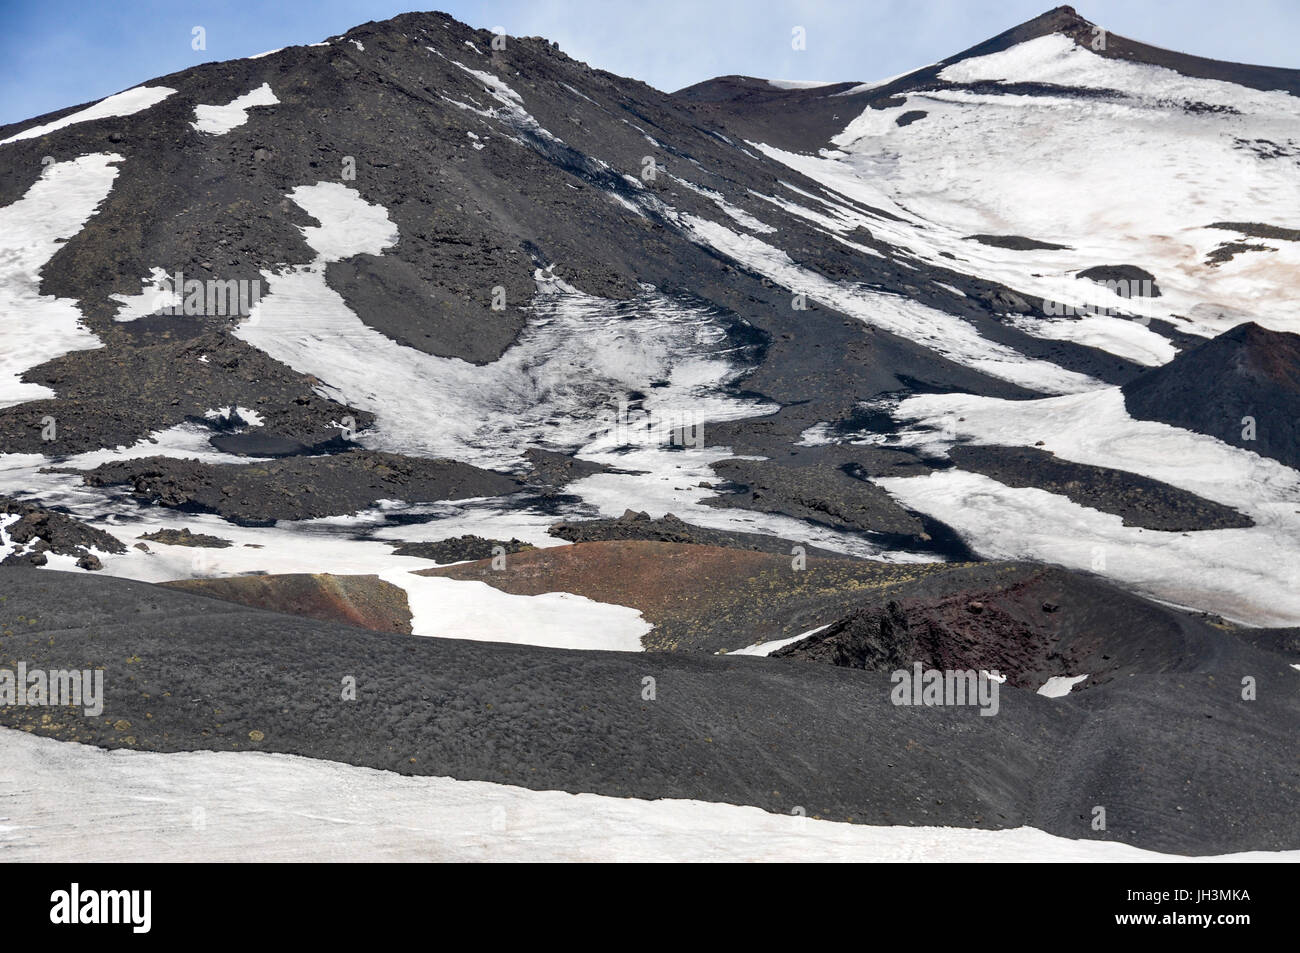 Snow and lava rock on the volcano, Mount Etna, Sicily, Italy. Stock Photo